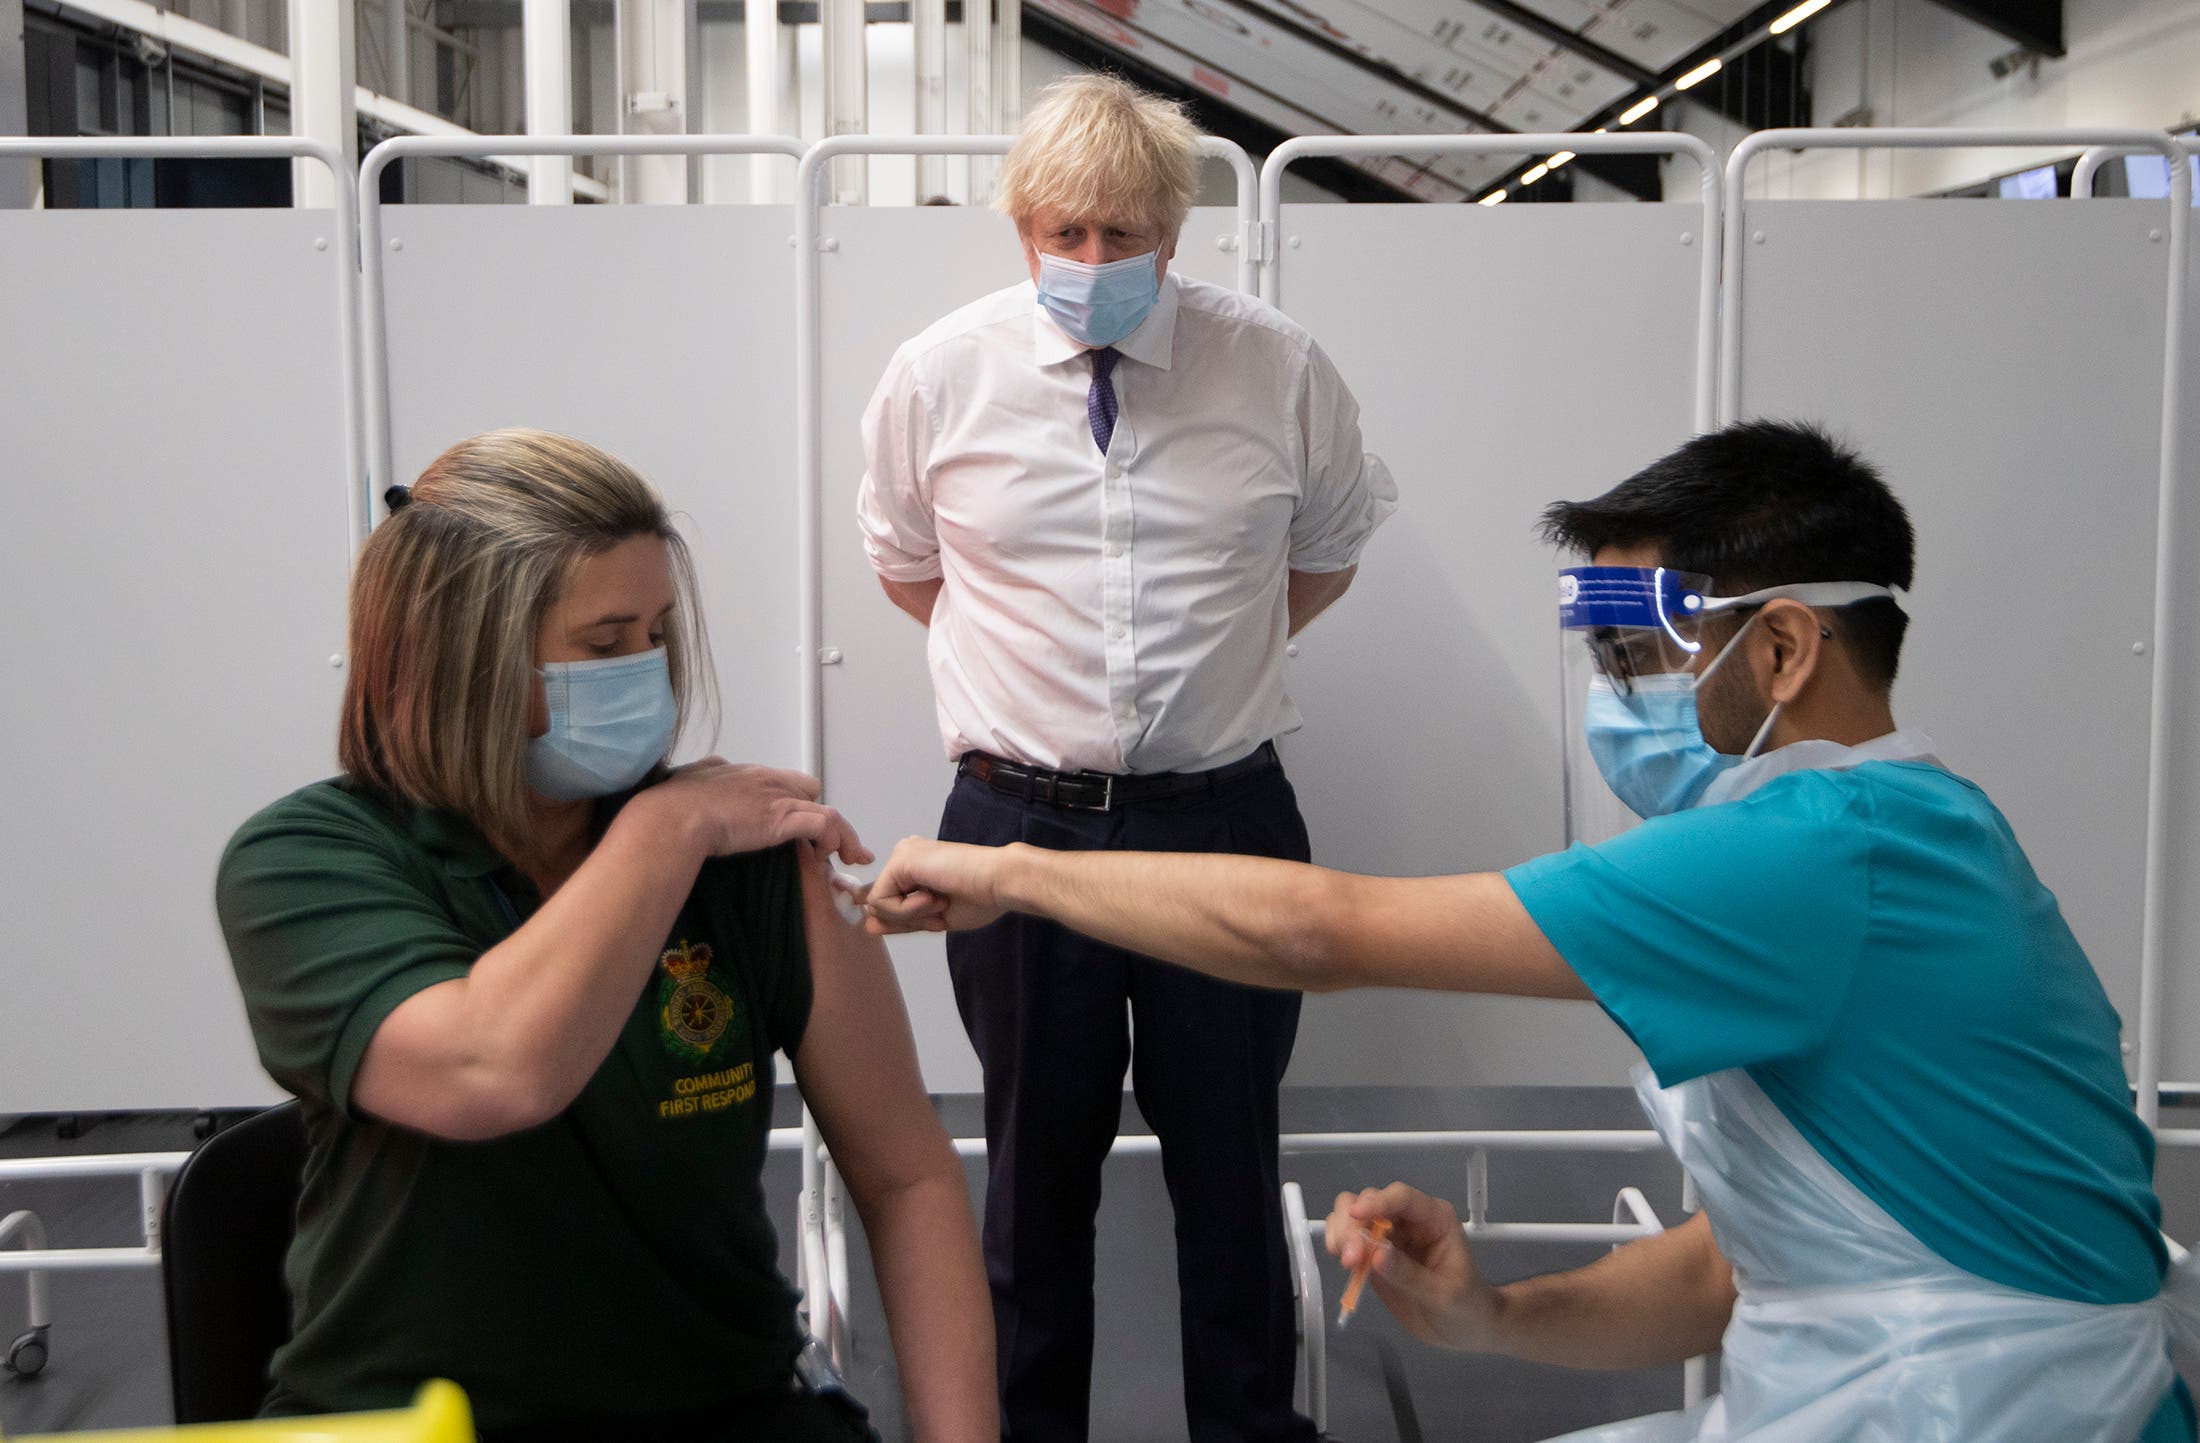 Britain's Prime Minister Boris Johnson watches first responder Caroline Cook receiving an injection of a Covid-19 vaccine at Ashton Gate Stadium in Bristol, England on Jan. 11, 2021. (AP)